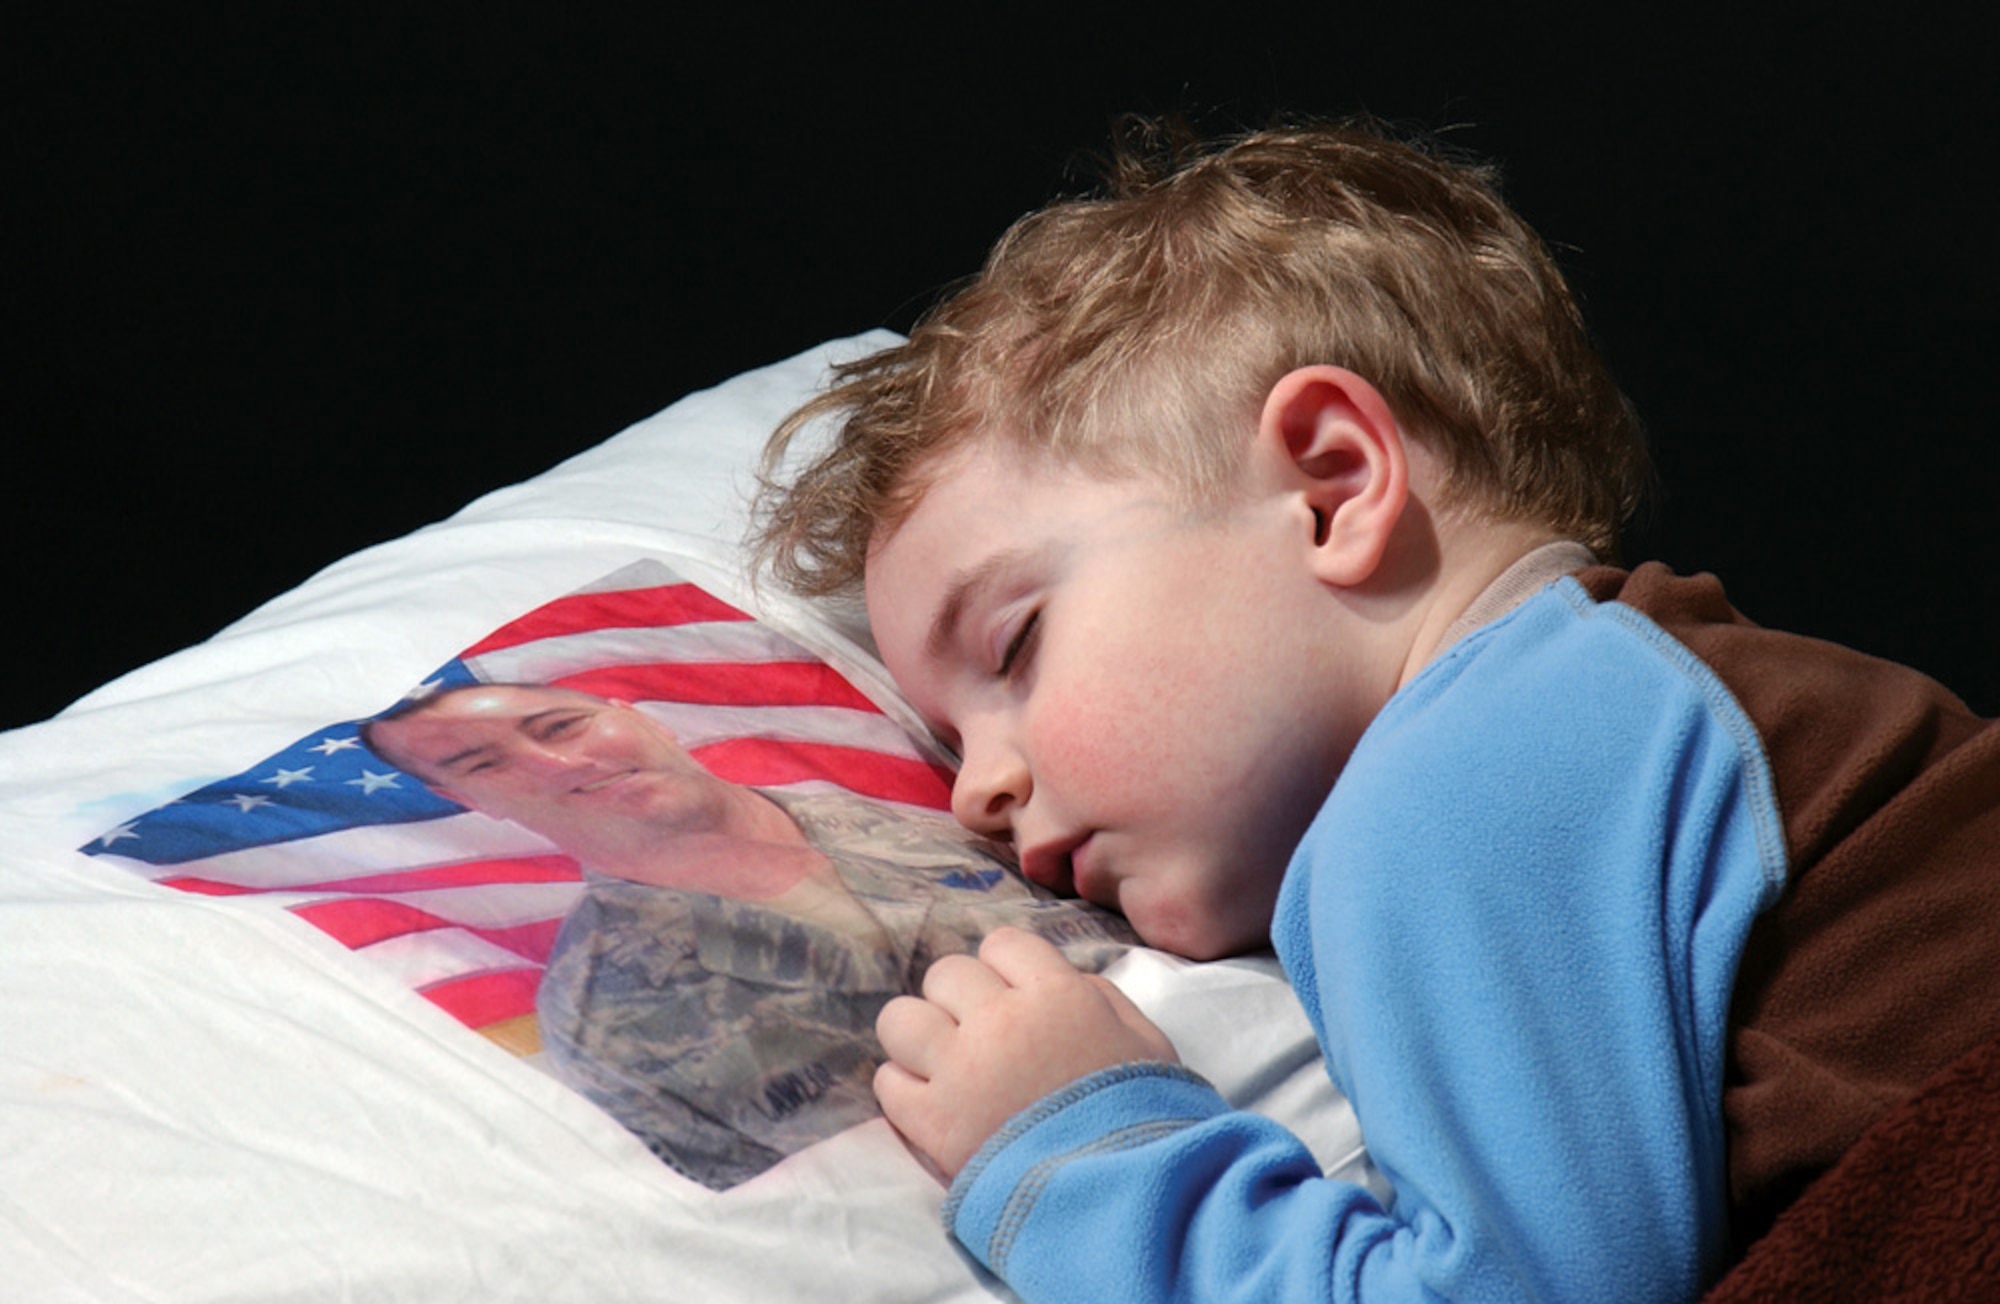 KEEPING DAD NEARBY -- This photograph of 3-year-old Blain Lawlor won the Portrait/Personality Photograph category in the 2009 Air Force Media Contest. The Airman and Family Readiness Center at Westover Air Reserve Base, Mass., created the pillowcase for Blain, so he could keep his dad, Master Sgt. Dan Lawlor, close during a deployment to Iraq. (U.S. Air Force photo/Staff Sgt. Hueming Mui)